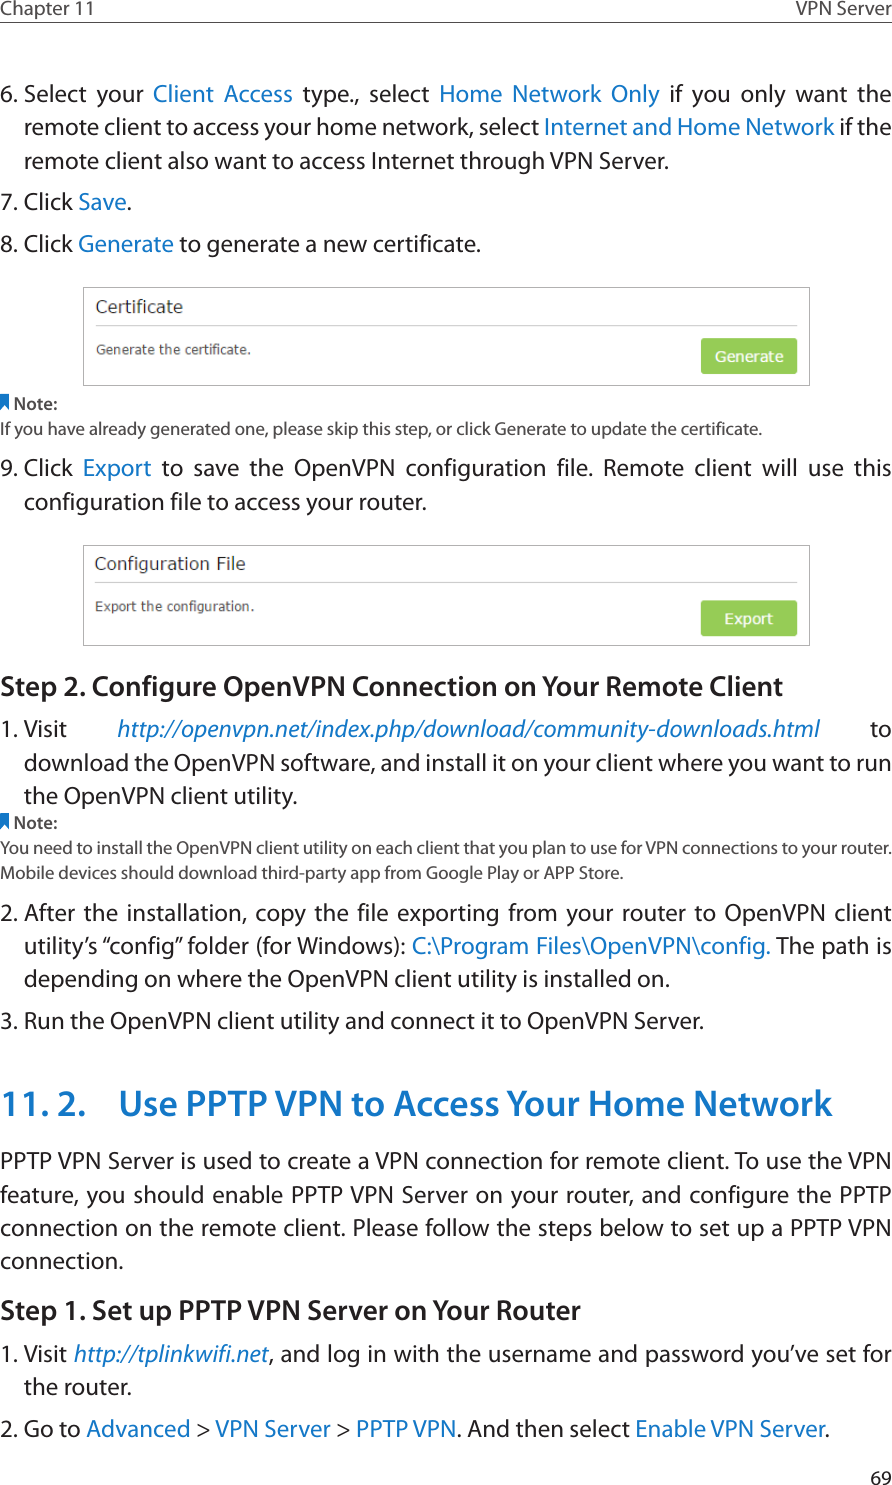 69Chapter 11 VPN Server6. Select your Client Access type., select Home Network Only if you only want the remote client to access your home network, select Internet and Home Network if the remote client also want to access Internet through VPN Server.7. Click Save.8. Click Generate to generate a new certificate. Note:If you have already generated one, please skip this step, or click Generate to update the certificate.9. Click  Export to save the OpenVPN configuration file. Remote client will use this configuration file to access your router.Step 2. Configure OpenVPN Connection on Your Remote Client1. Visit  http://openvpn.net/index.php/download/community-downloads.html to download the OpenVPN software, and install it on your client where you want to run the OpenVPN client utility.Note:You need to install the OpenVPN client utility on each client that you plan to use for VPN connections to your router. Mobile devices should download third-party app from Google Play or APP Store.2. After the installation, copy the file exporting from your router to OpenVPN client utility’s “config” folder (for Windows): C:\Program Files\OpenVPN\config. The path is depending on where the OpenVPN client utility is installed on.3. Run the OpenVPN client utility and connect it to OpenVPN Server.11. 2.  Use PPTP VPN to Access Your Home NetworkPPTP VPN Server is used to create a VPN connection for remote client. To use the VPN feature, you should enable PPTP VPN Server on your router, and configure the PPTP connection on the remote client. Please follow the steps below to set up a PPTP VPN connection.Step 1. Set up PPTP VPN Server on Your Router1. Visit http://tplinkwifi.net, and log in with the username and password you’ve set for the router.2. Go to Advanced &gt; VPN Server &gt; PPTP VPN. And then select Enable VPN Server.